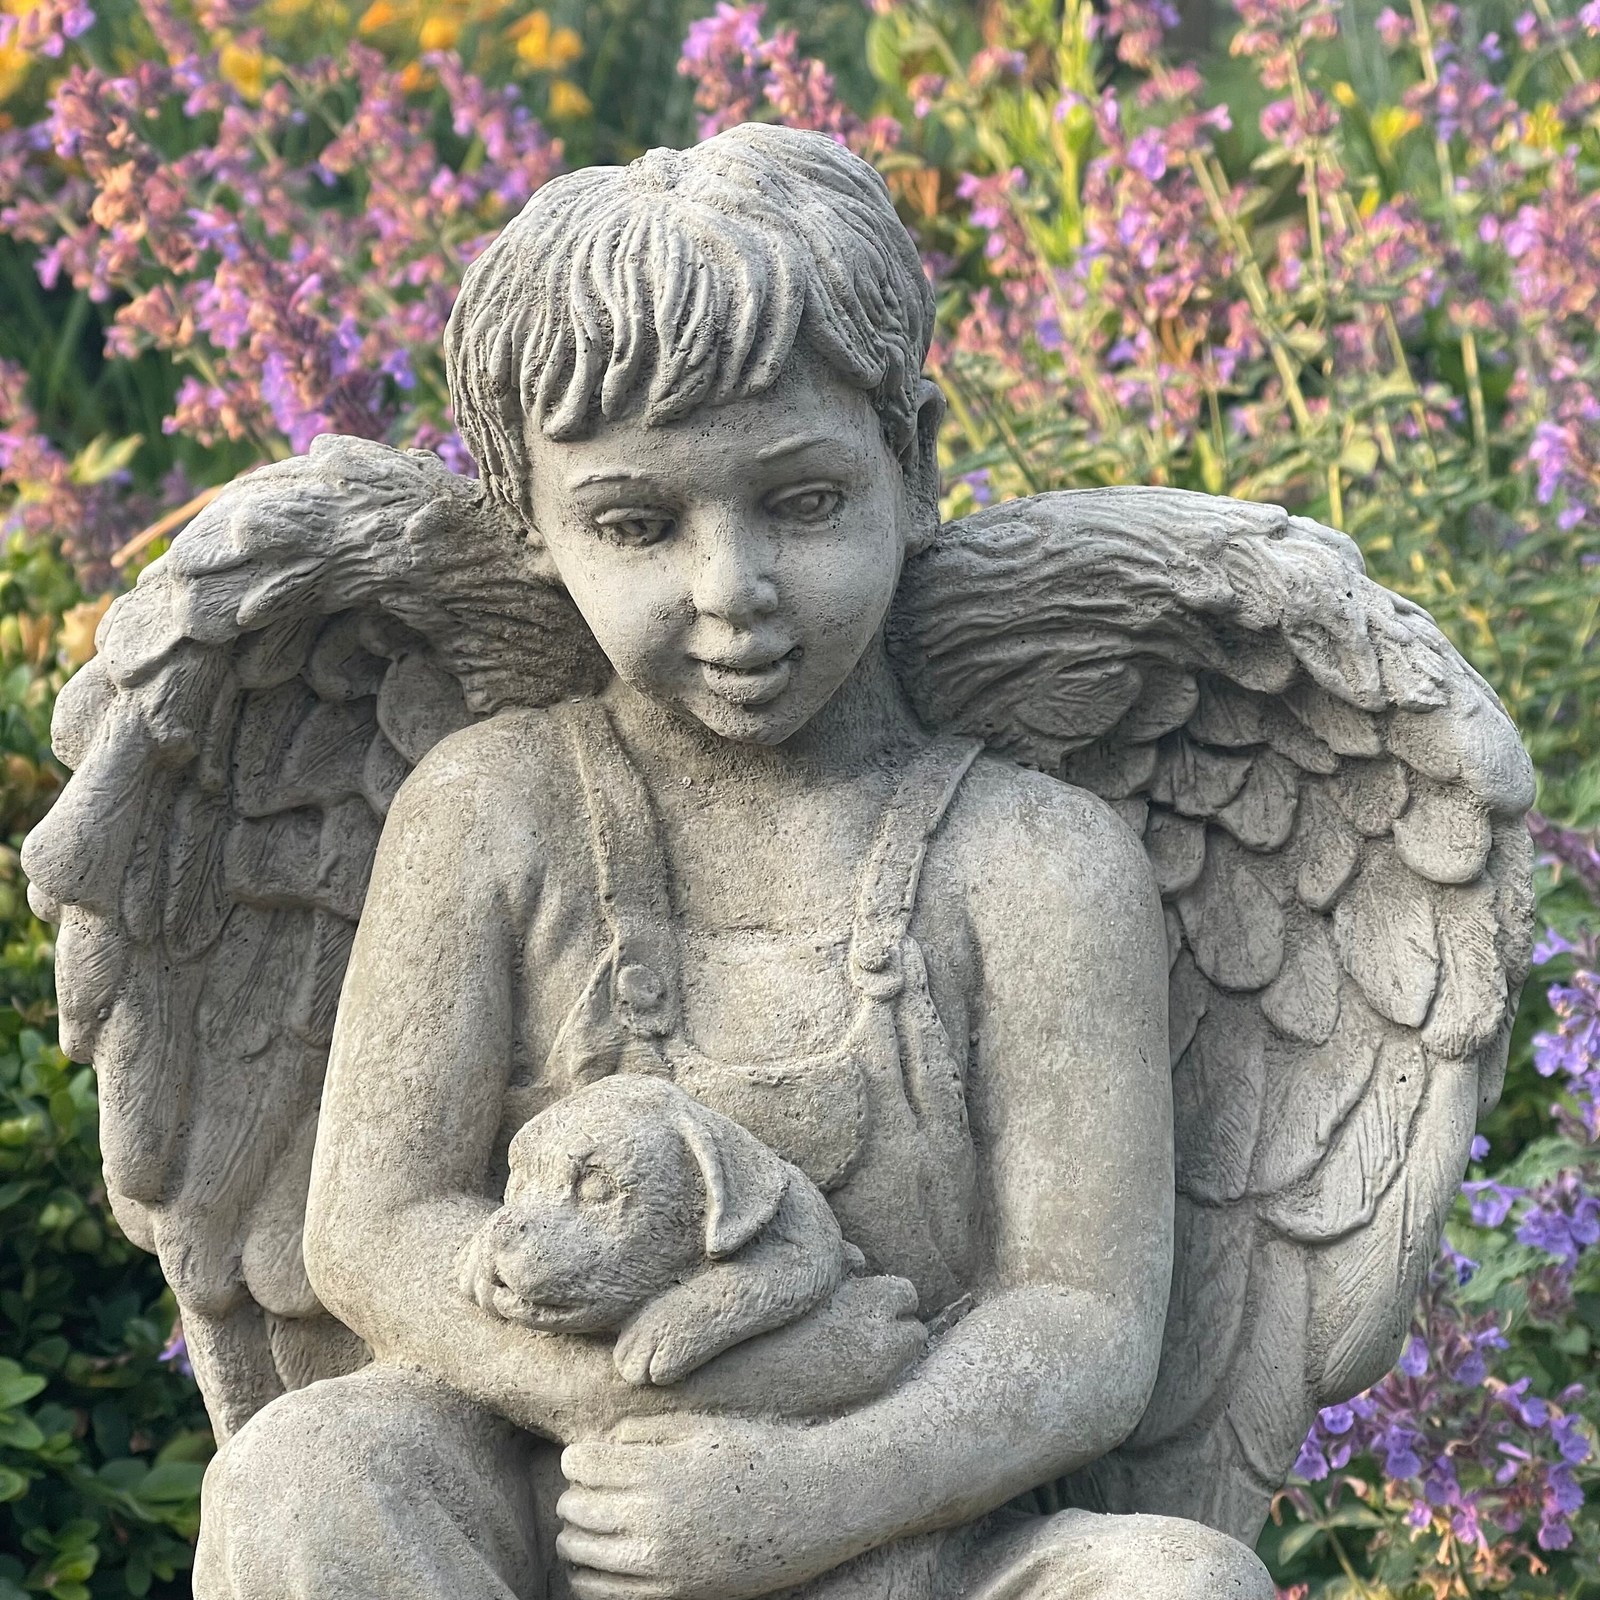 Angel Holding Dog Statue Outdoor Concrete Garden Cherub With Wings And Puppy Cem - $134.99